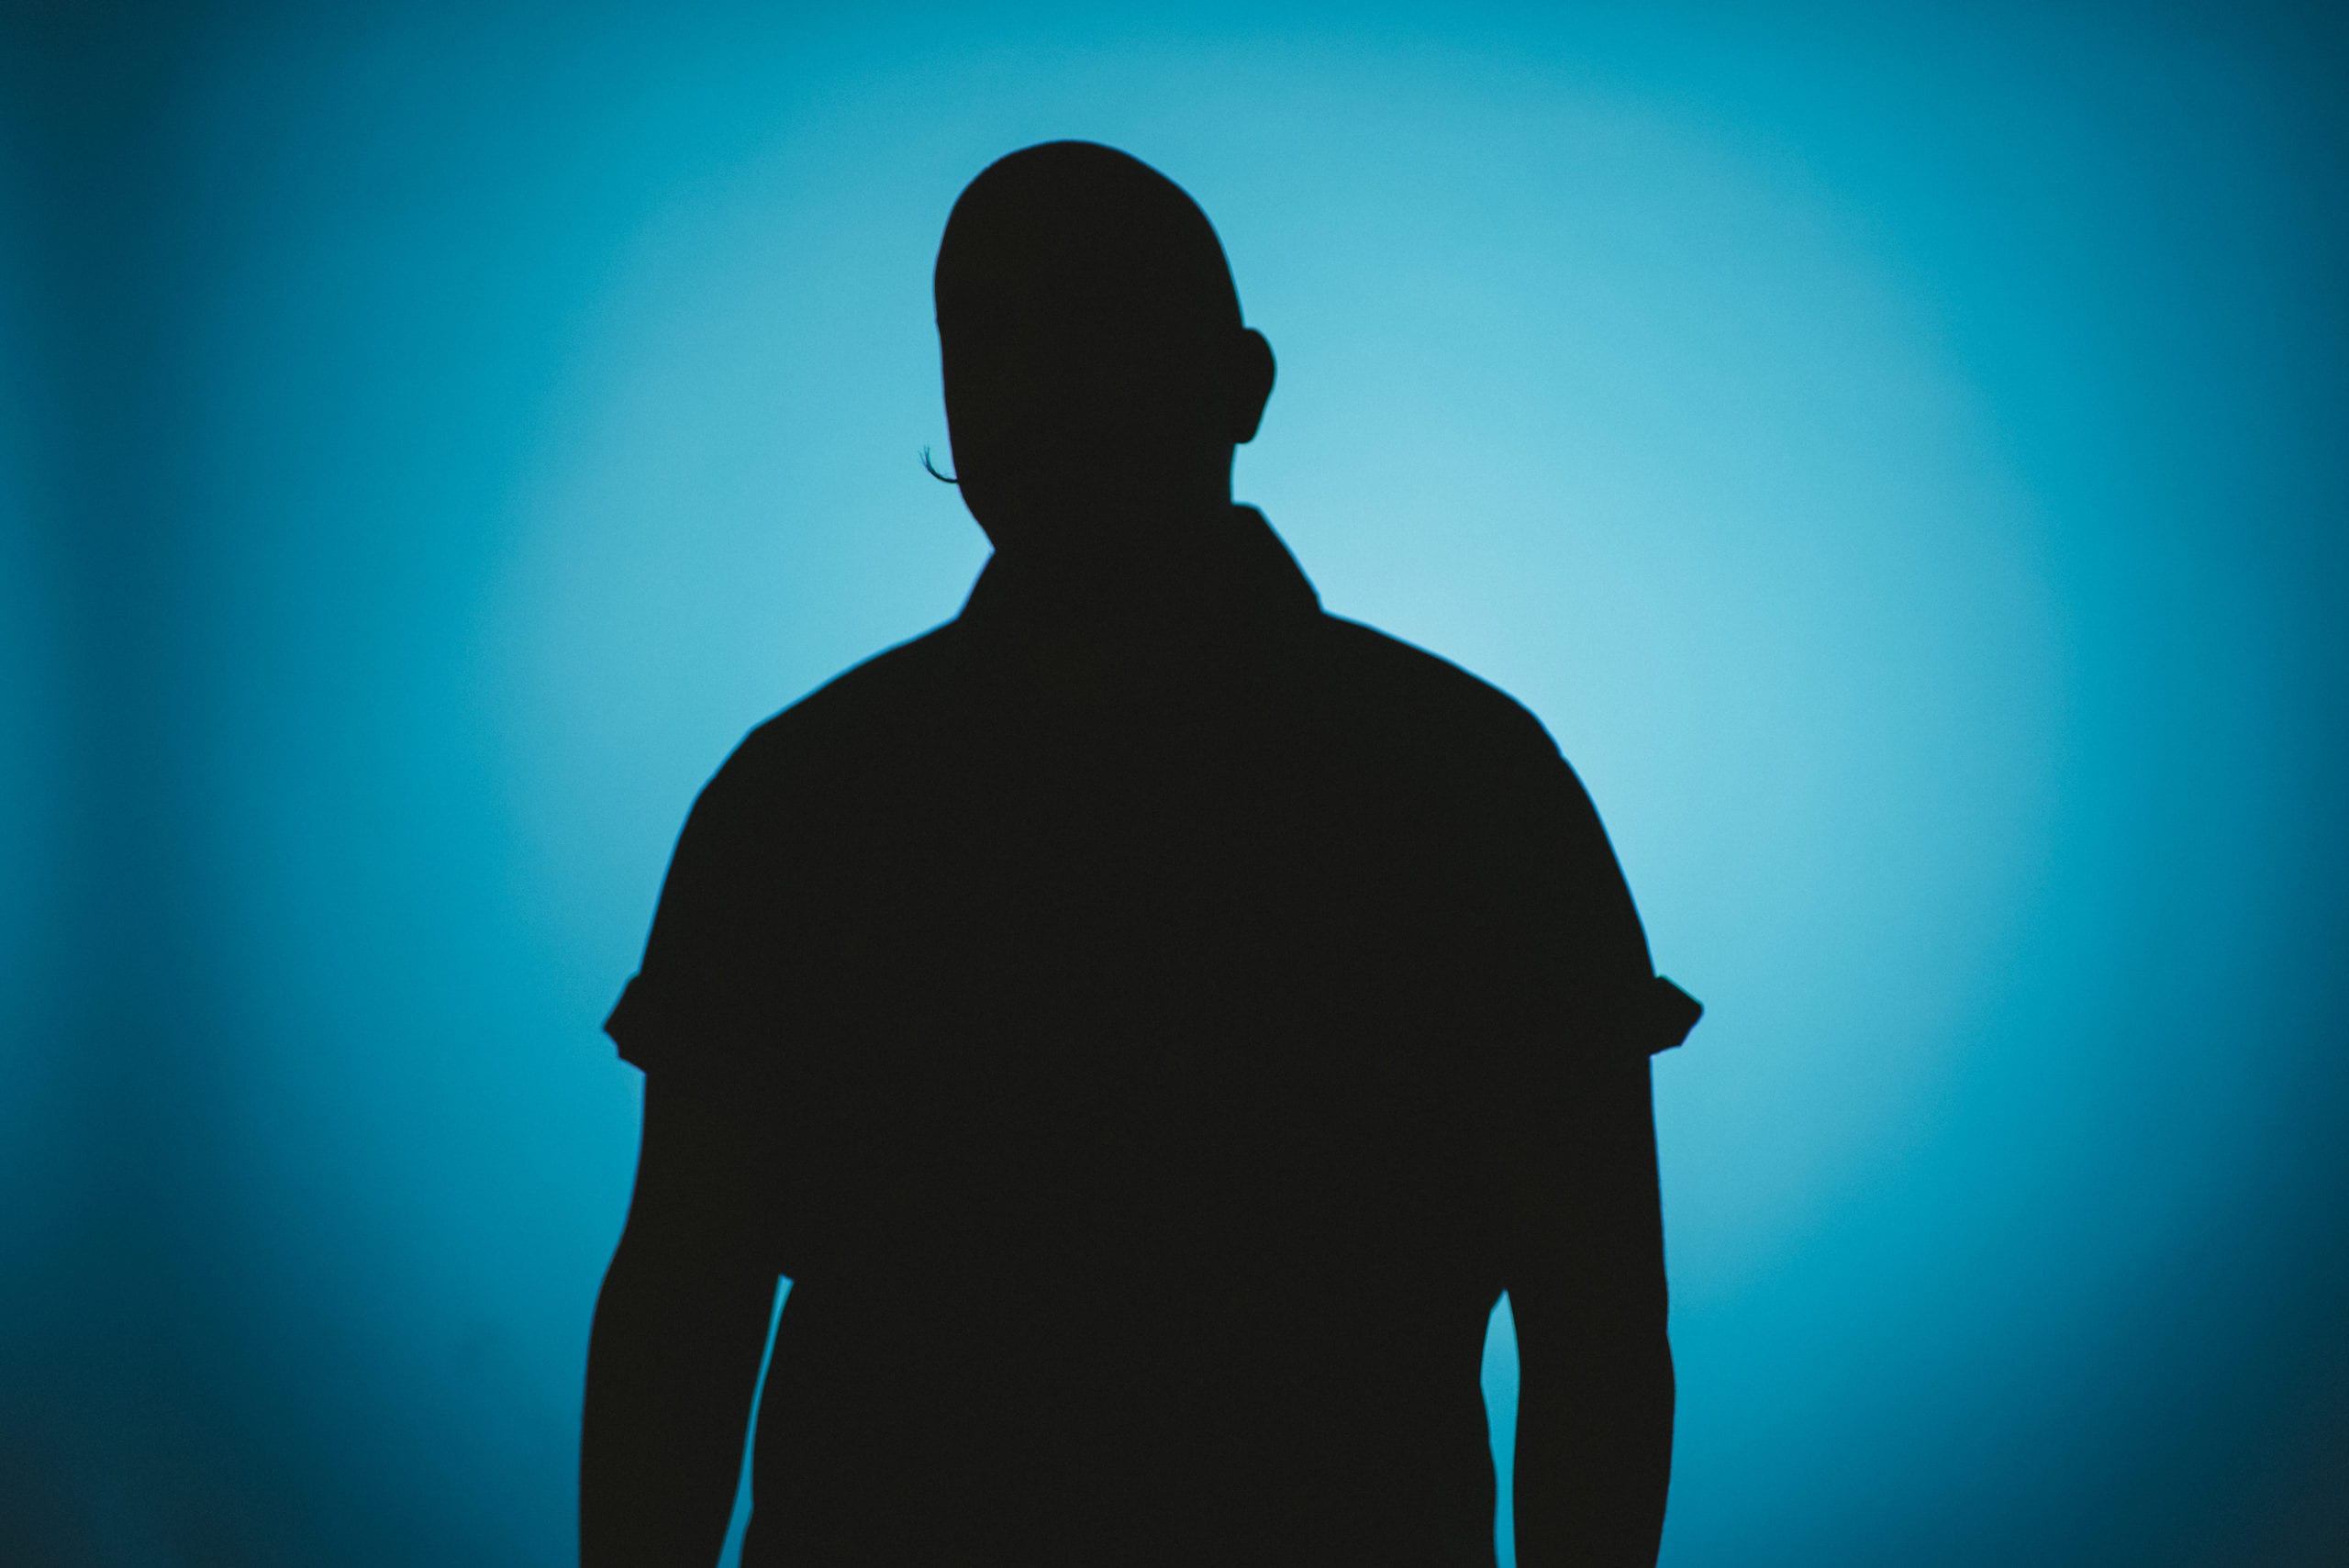 Heart Piece Media Day Silhouette of a bald man wearing a moustache posing for the camera with a light blue background